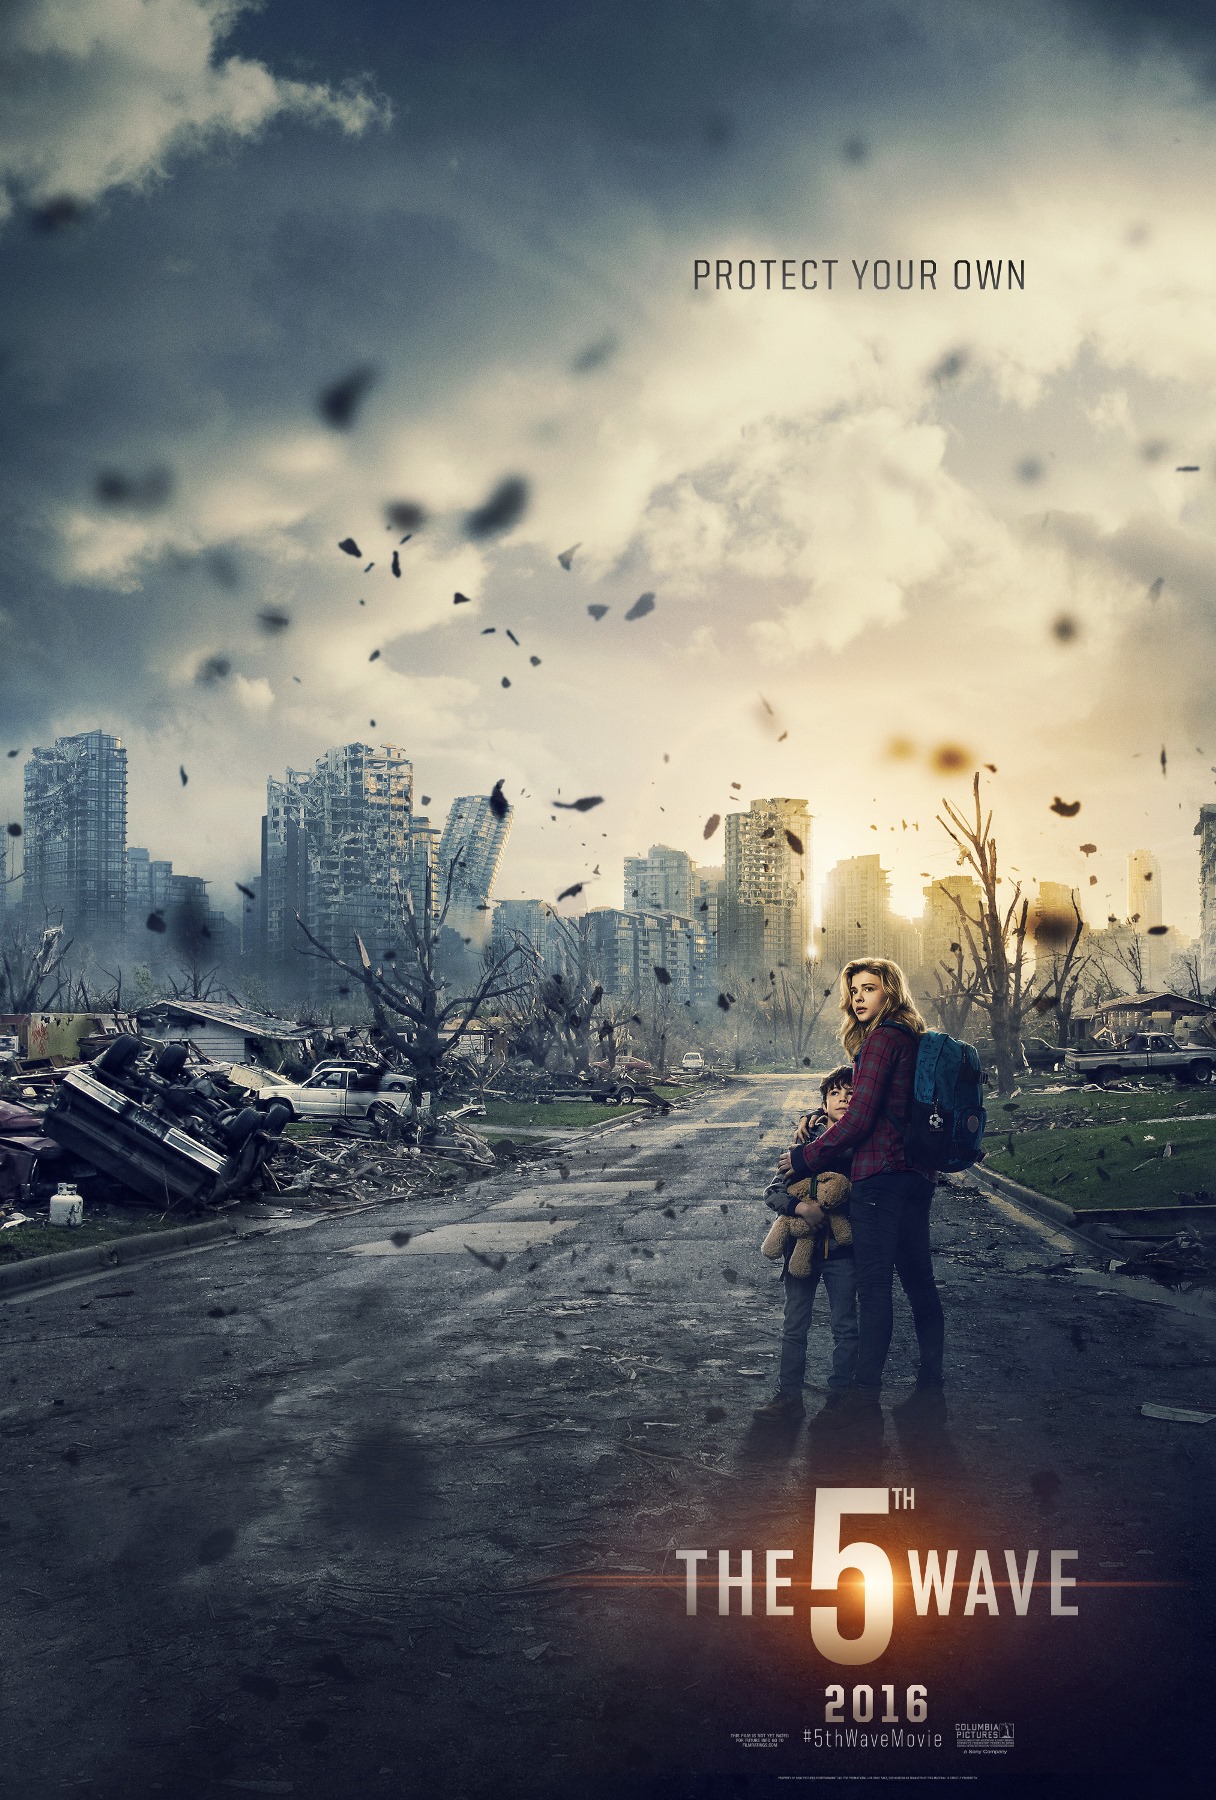 Author Rick Yancey reflects on “The 5th Wave”